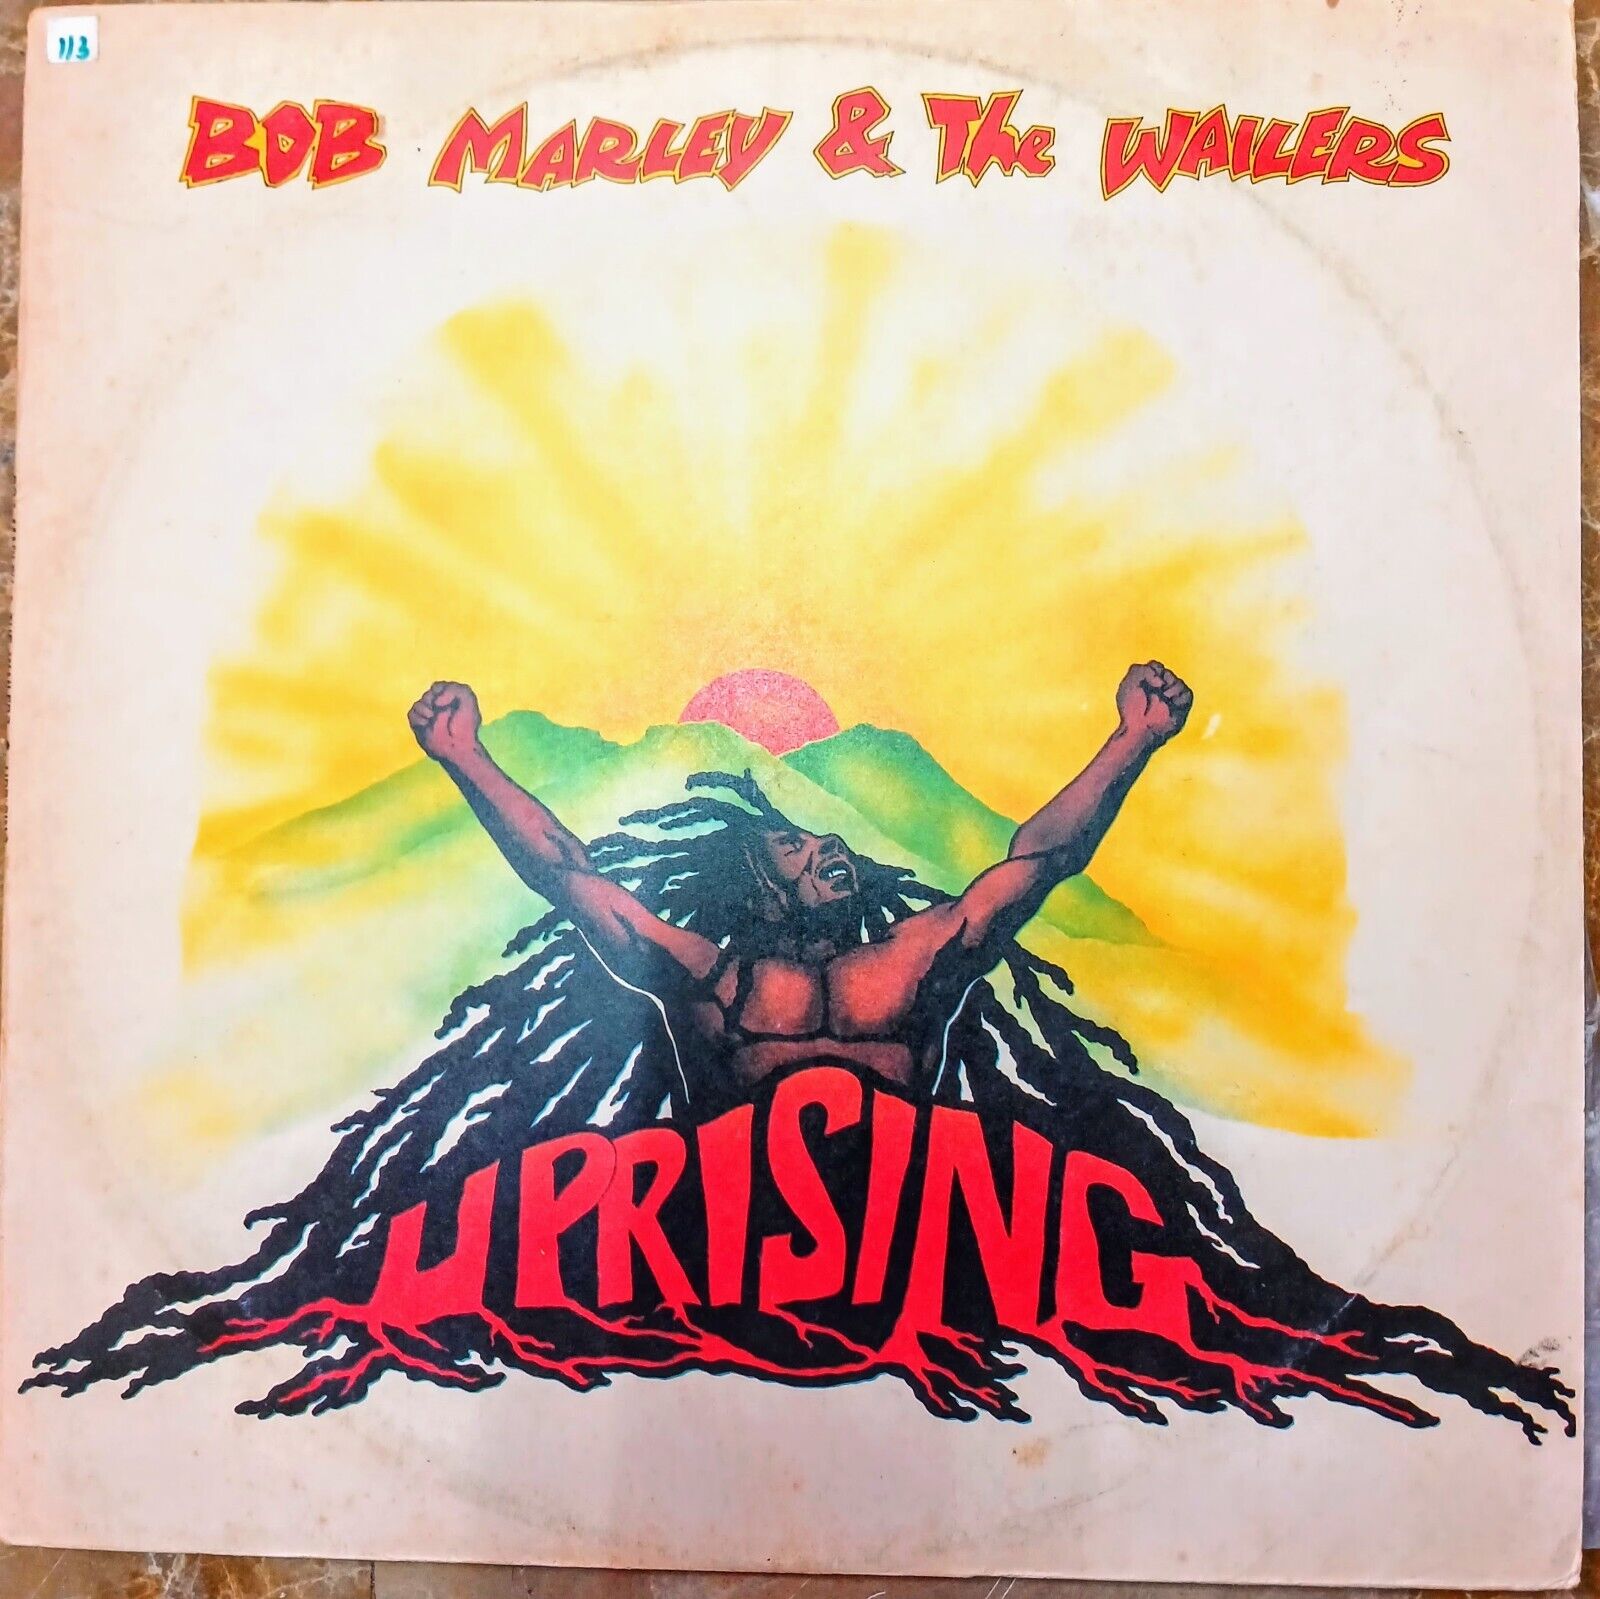 Vinyl Records Lp Bob marley & The Wailers " UPRISING" 1980 "Could You Be Love"